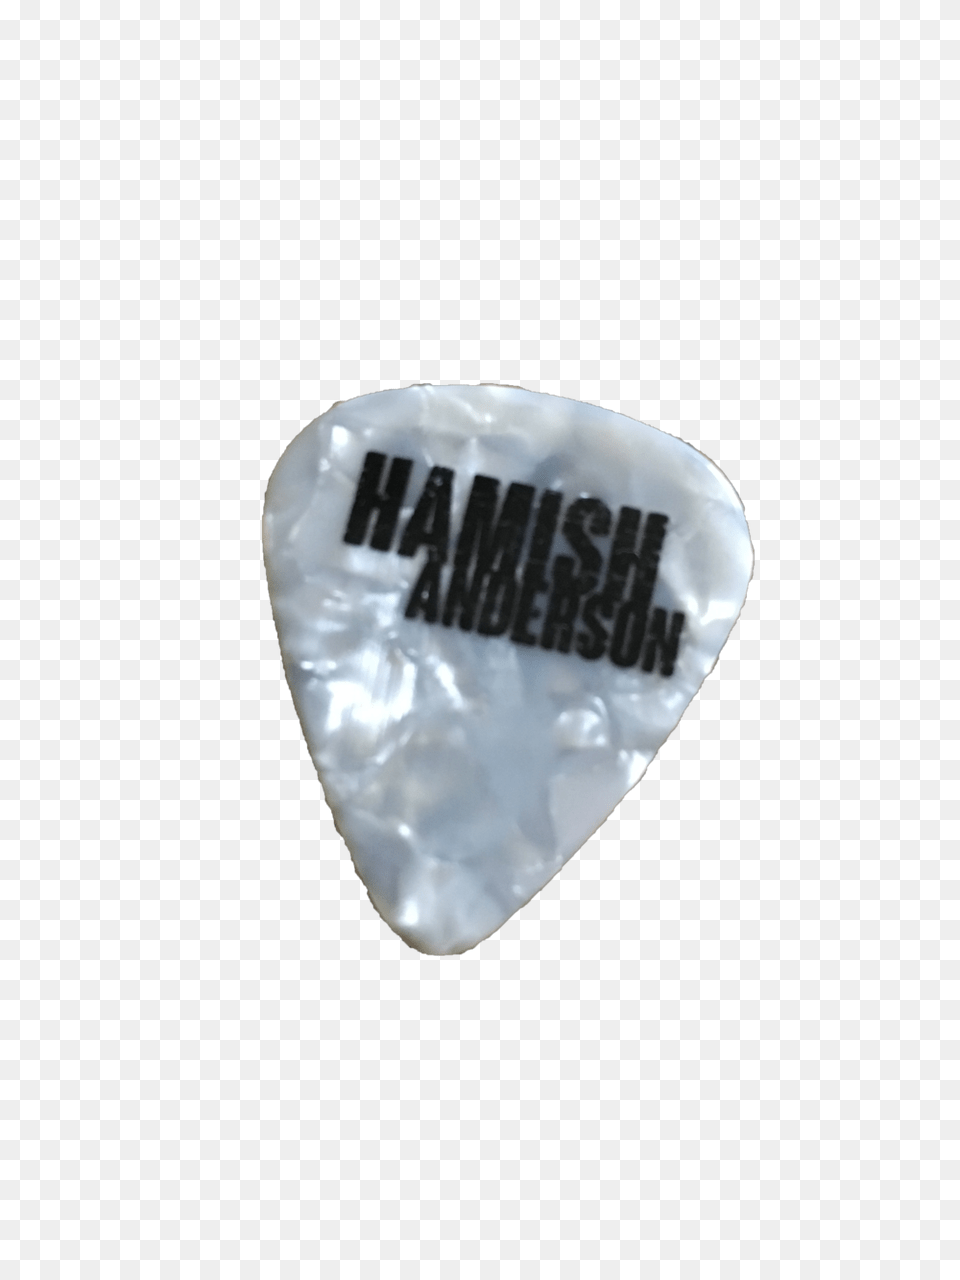 Guitar Pick Image With No Balloon, Musical Instrument, Plectrum, Egg, Food Free Png Download